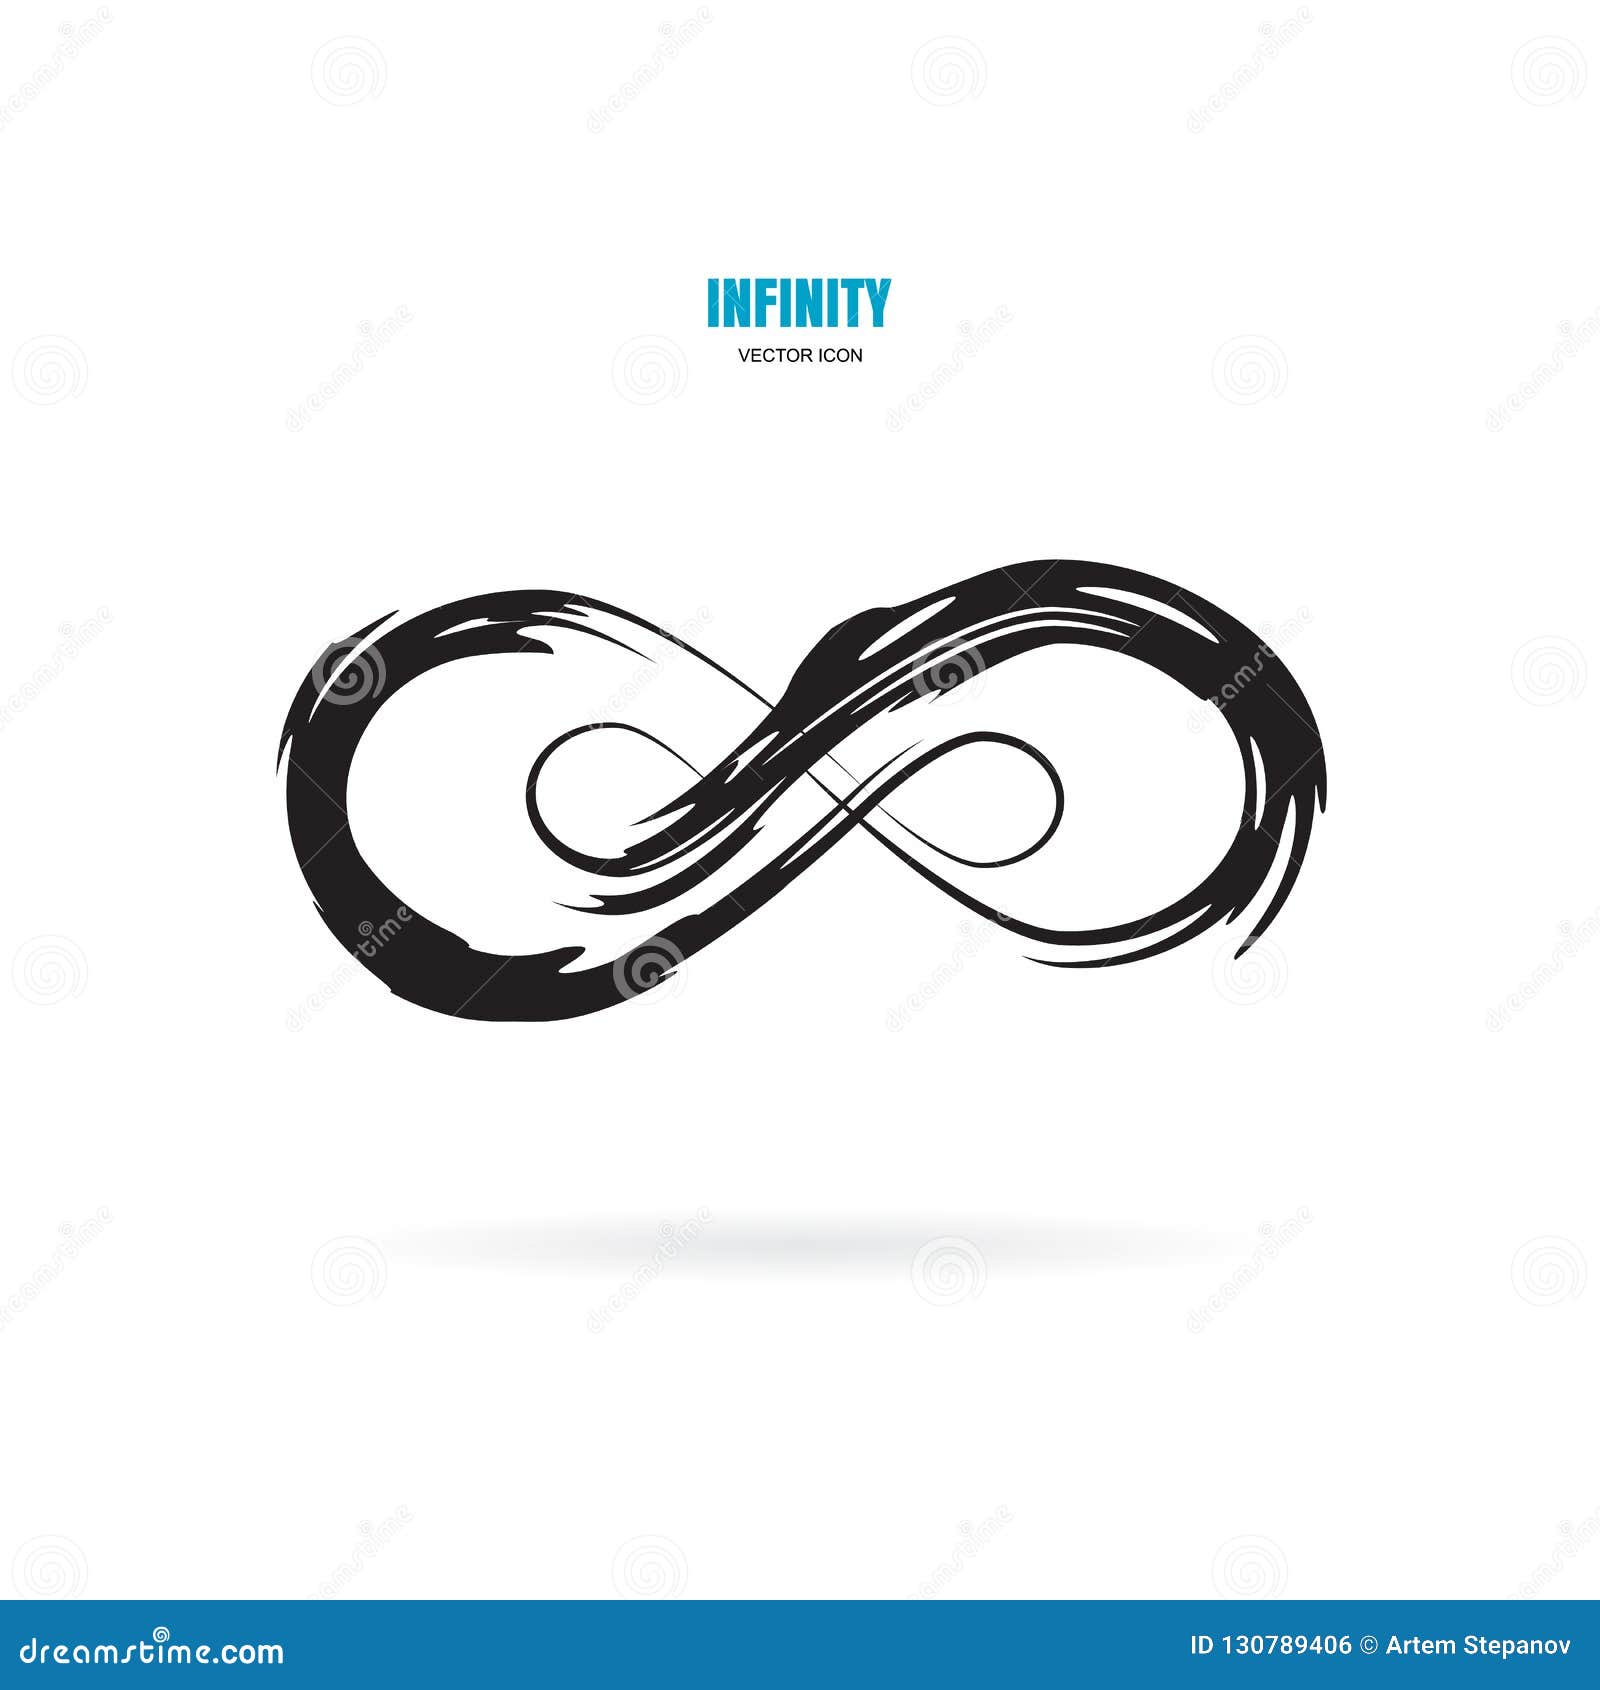 Black infinity symbol icon. Concept of infinite, limitless and endless.  Simple flat vector design element. Stock Vector